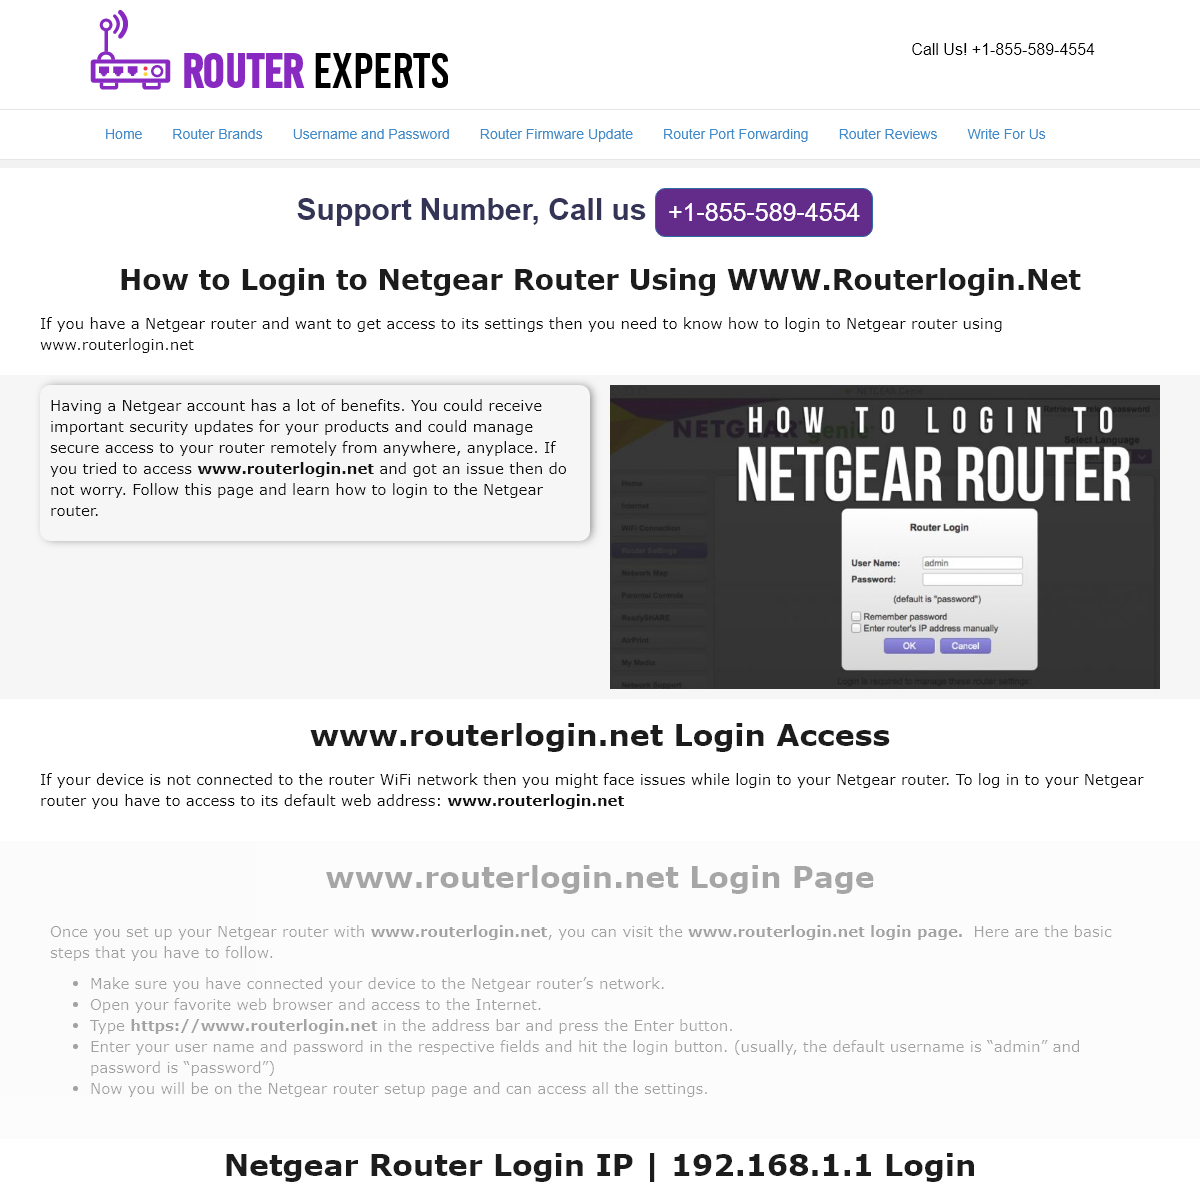 A complete backup of routerexperts.net